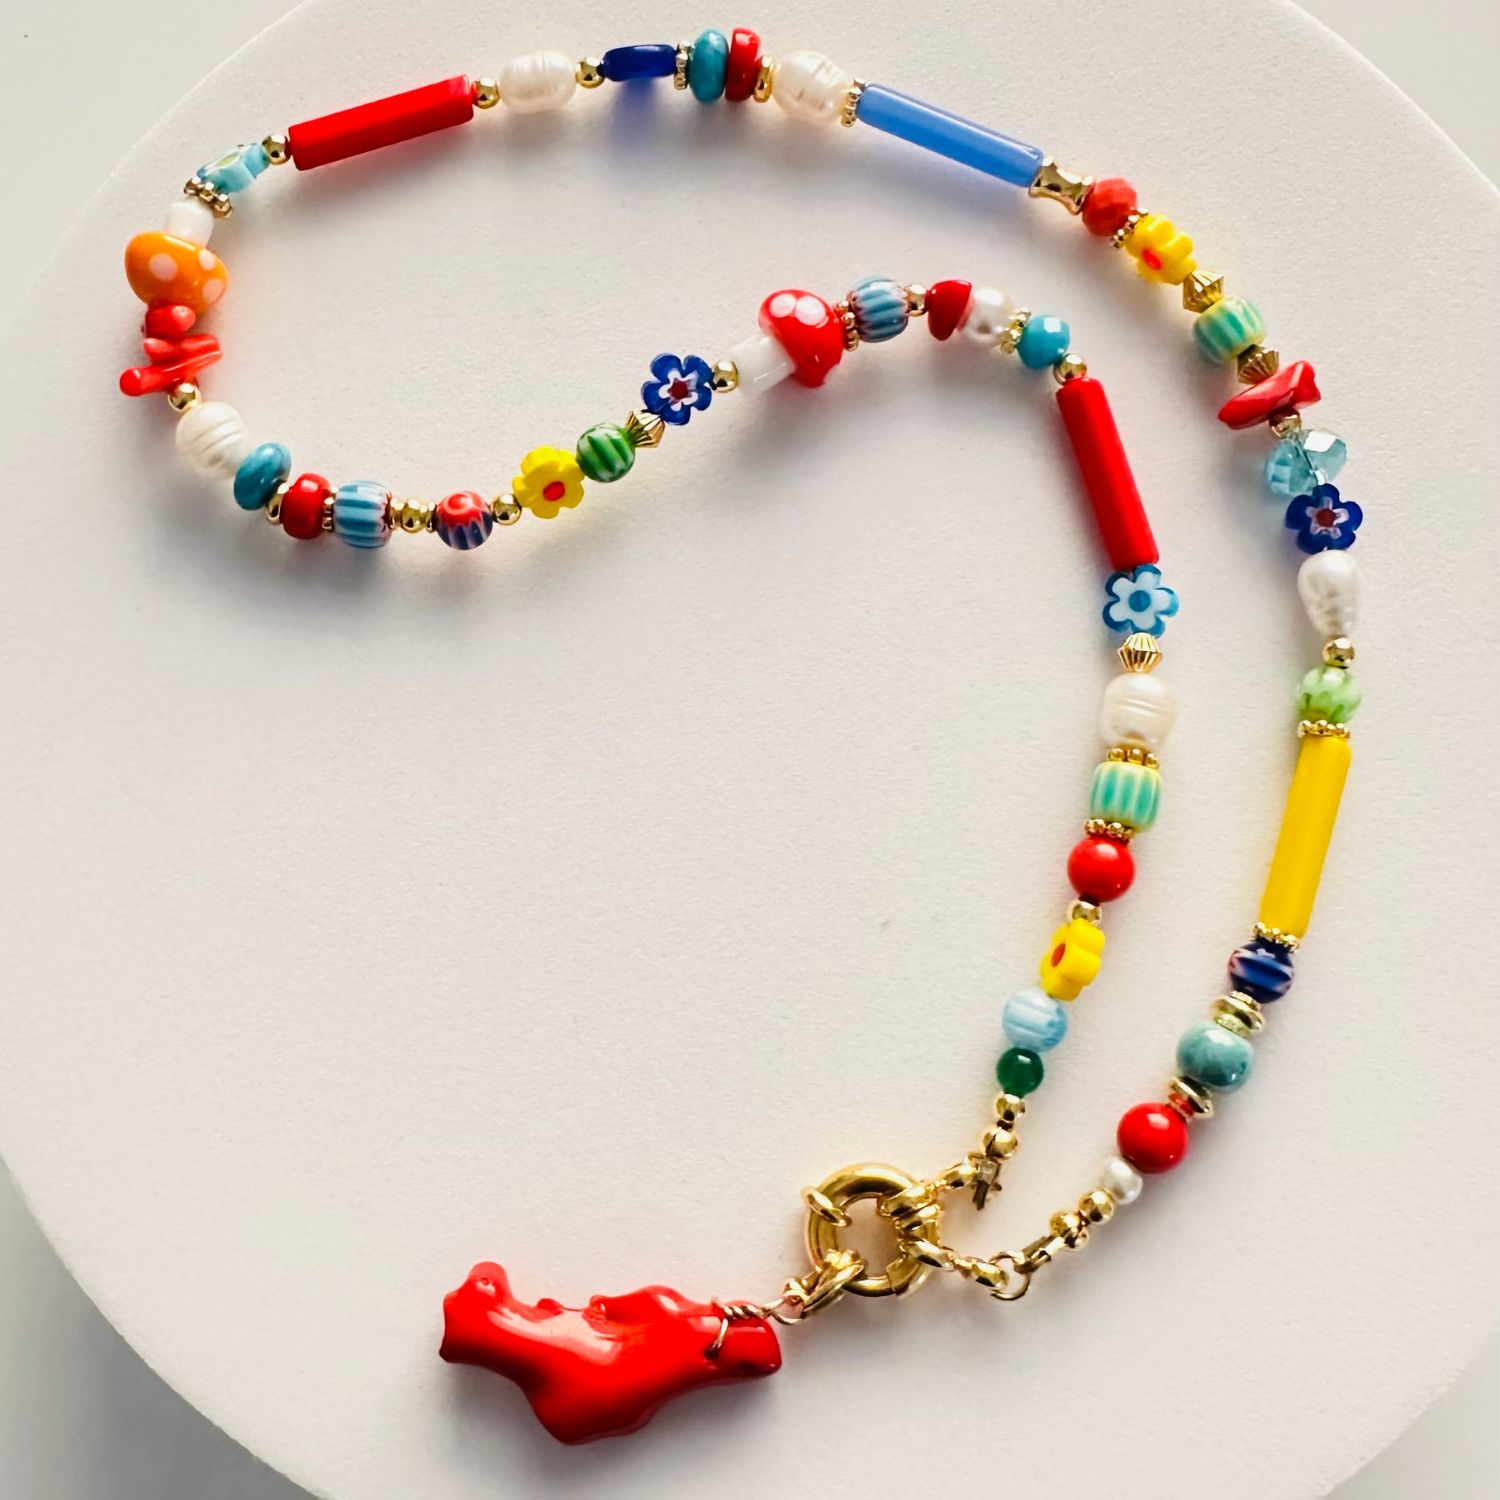 Embrace the vibrant essence of summer with our enchanting necklace, a playful symphony of colors and textures. This unique piece features a delightful mix of Millefiori beads, pearls, evil-eye beads, corals, glass beads, bamboo chips, Murano crystals, and ceramics. Adorned with dainty Millefiori flowers and charming Murano mushrooms, it exudes a whimsical, childlike joy. The multicolored beads create a captivating mosaic of hues, making this necklace a wearable celebration of life. Secured with a marine gold clasp, this lively accessory is perfect for adding a splash of color and a touch of fun to any outfit. Let its lively colors and intricate details bring a sense of joy and carefree elegance to your style.